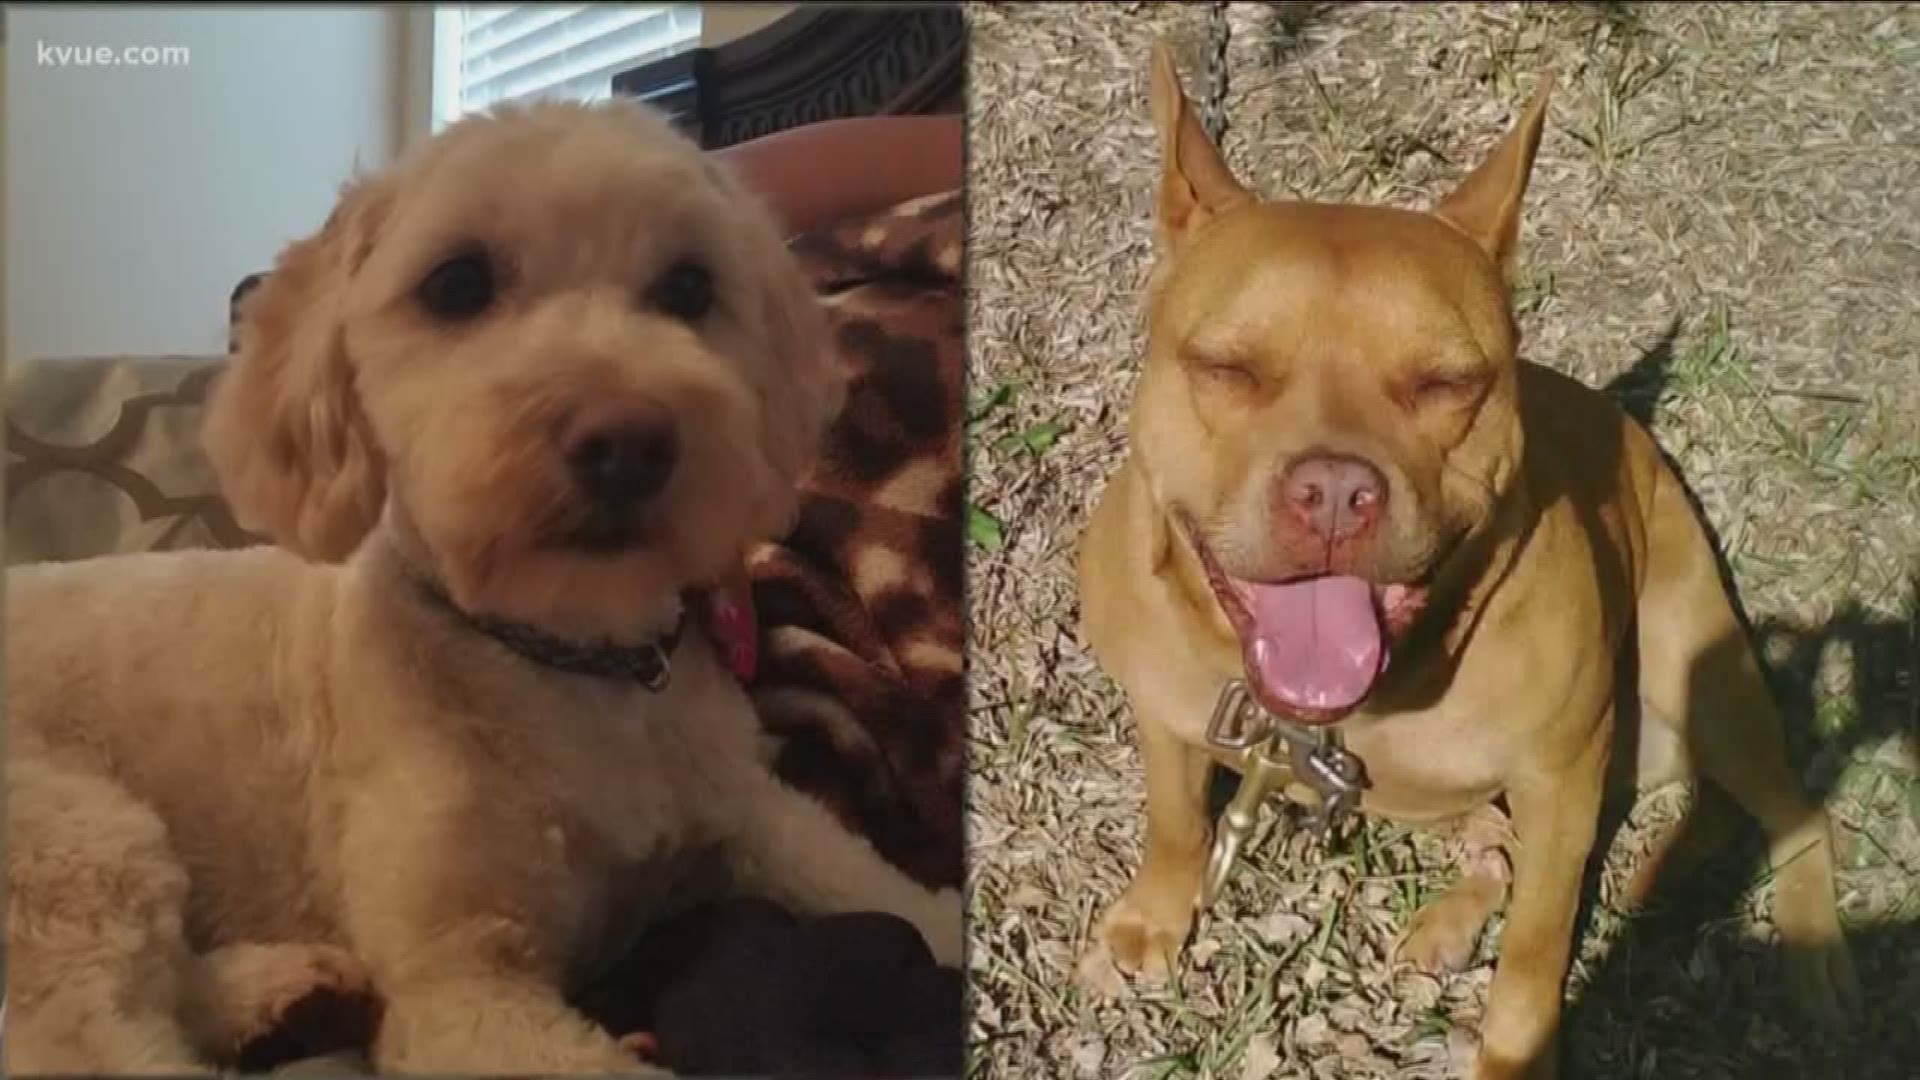 In just over a month's time, two dogs were killed by other dogs inside the city limits of Kyle.